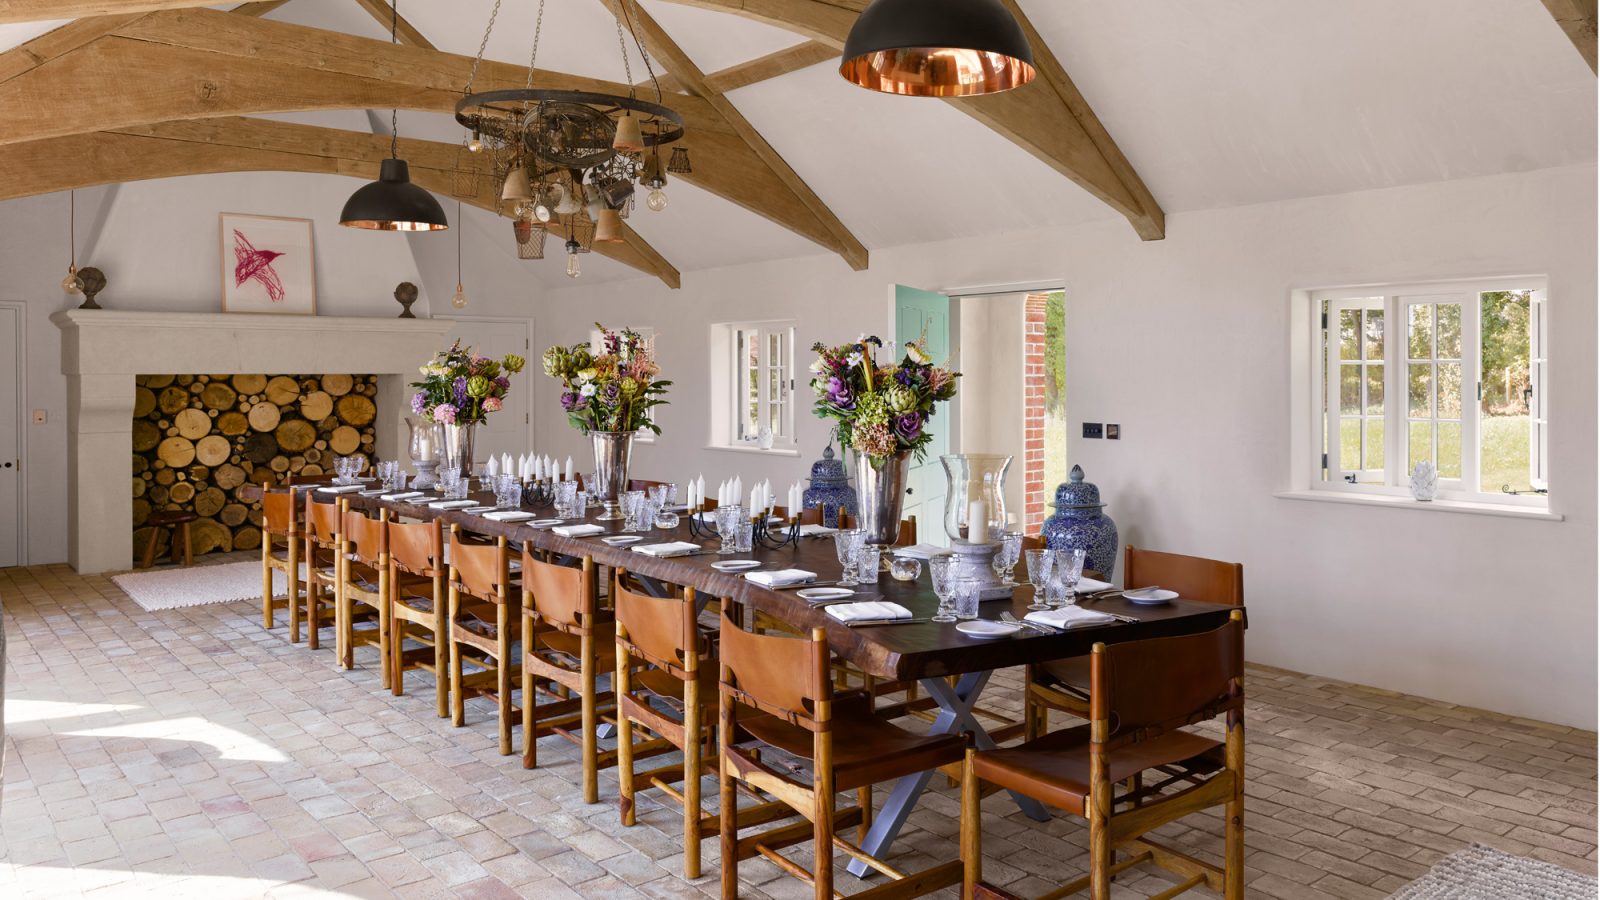 The Walled Garden - kate & tom's Large Holiday Homes